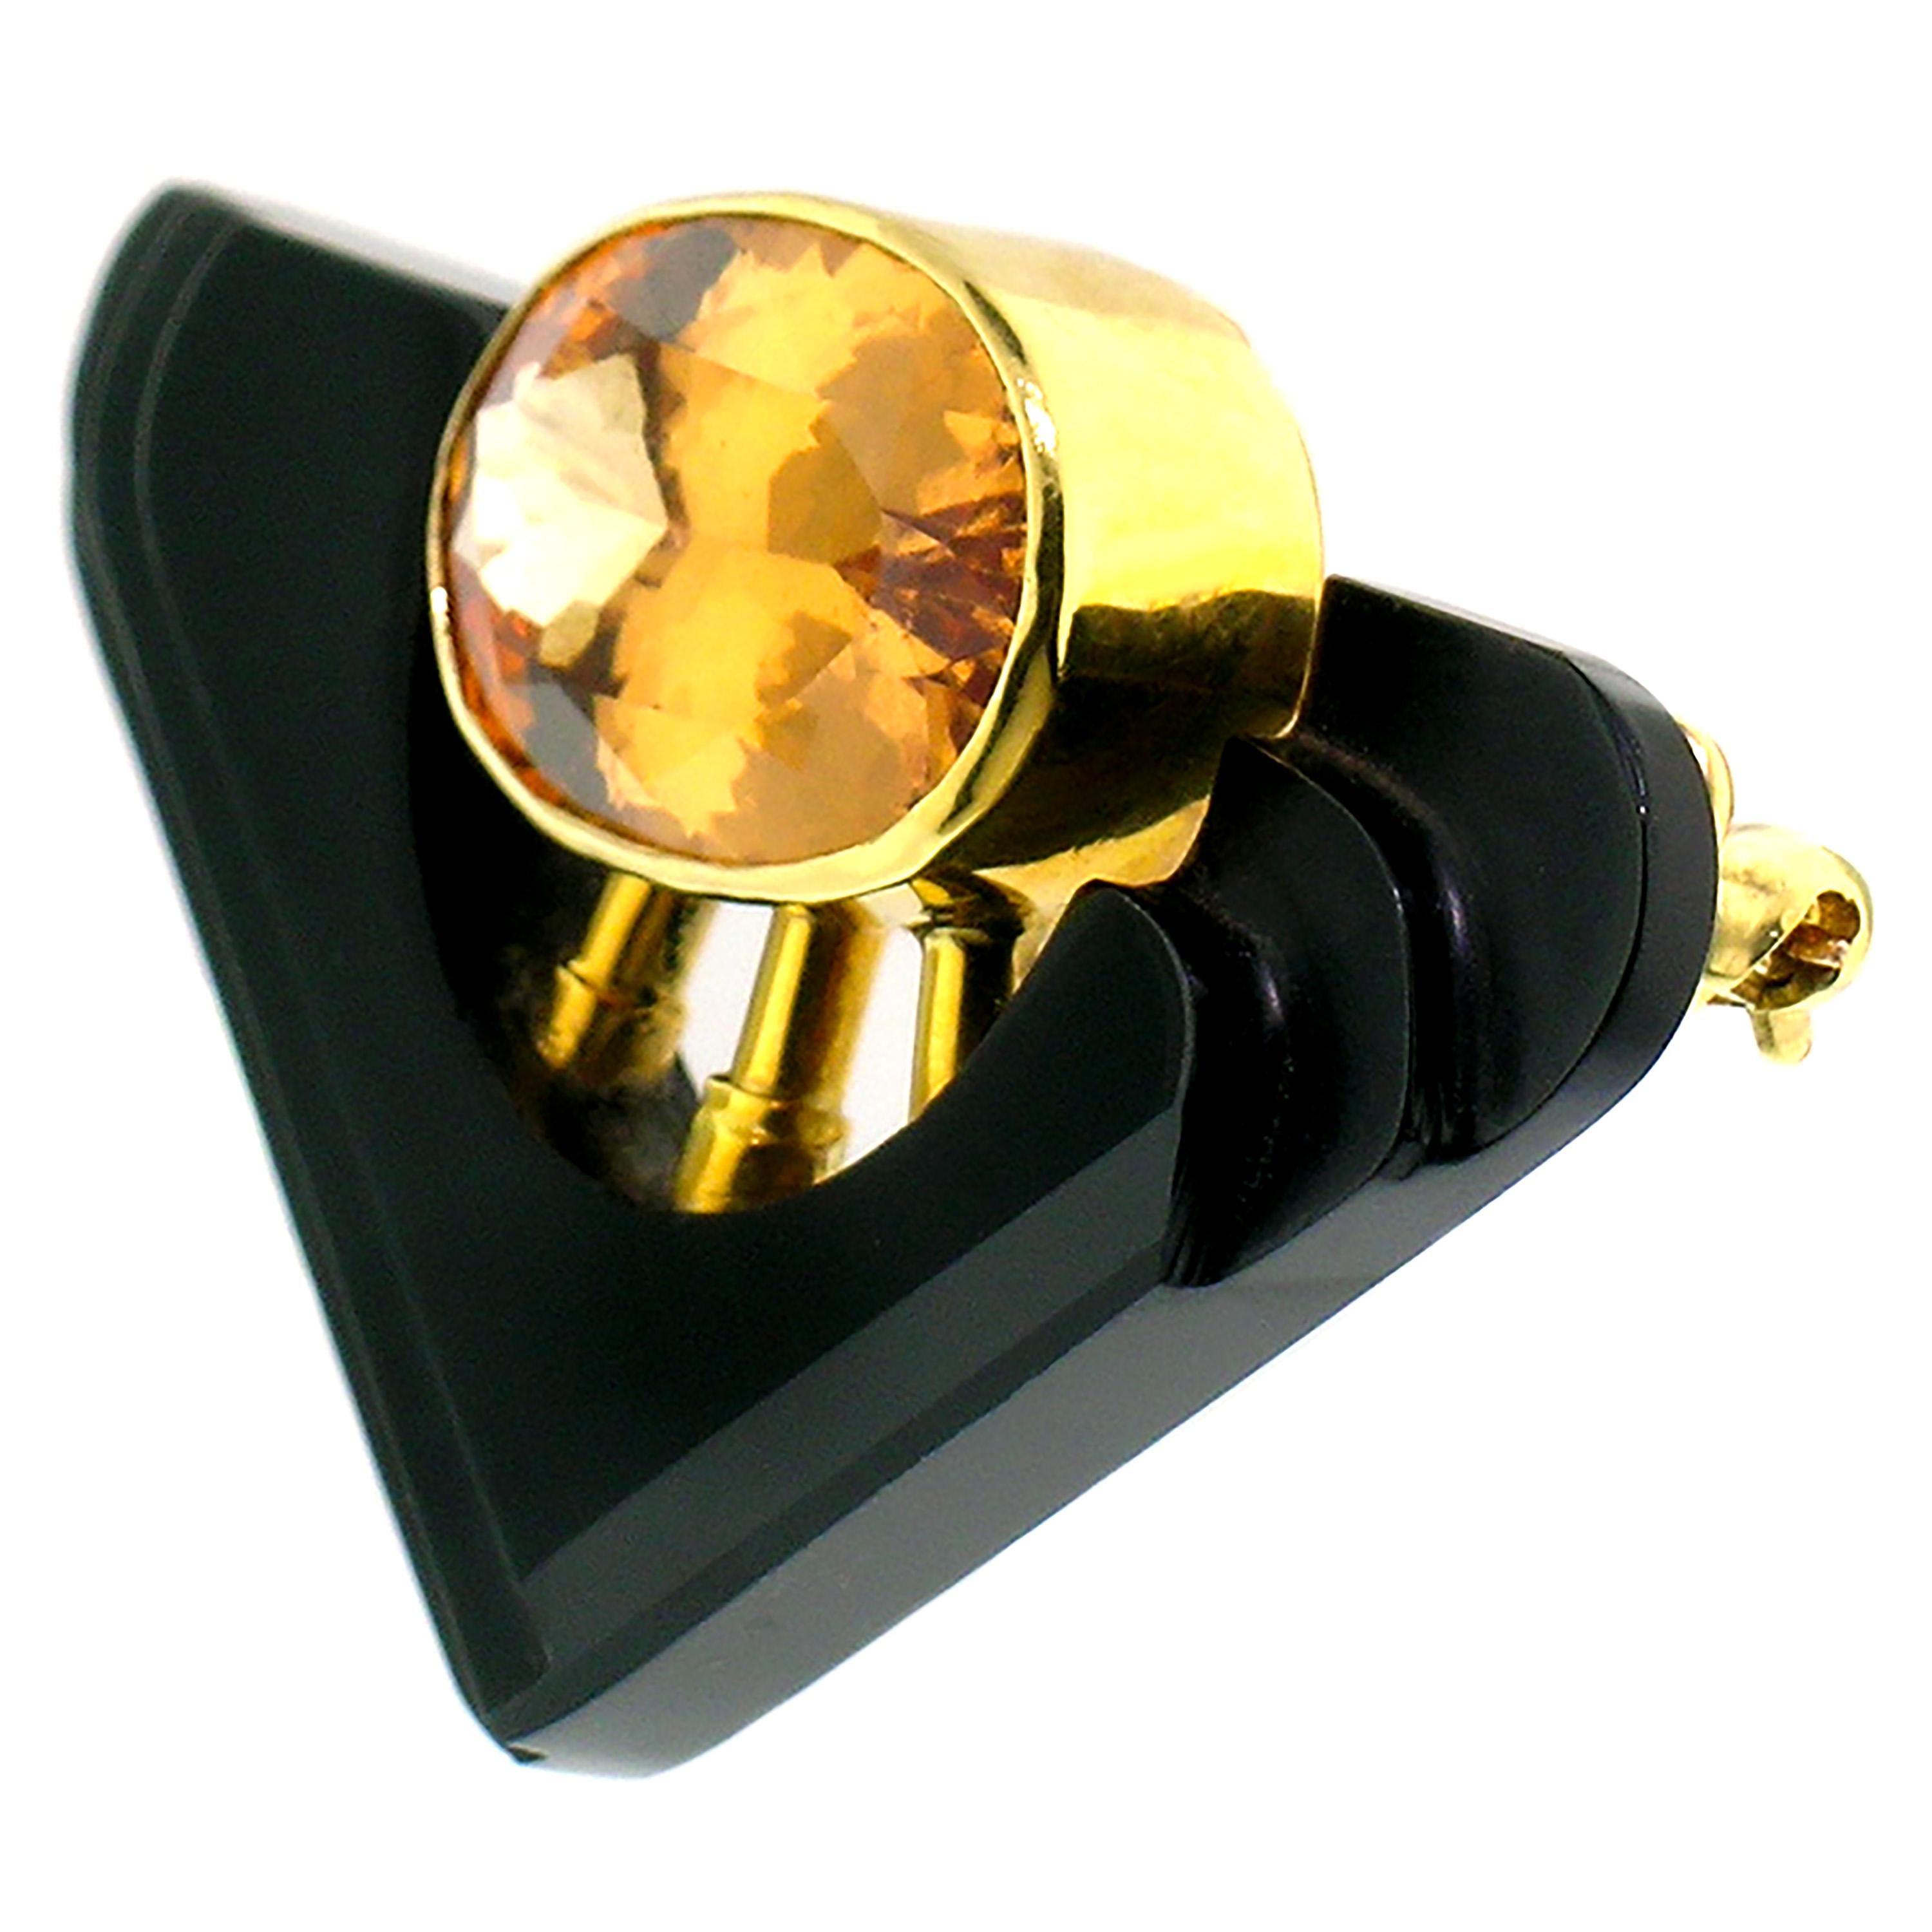 Oval Cut 14.7ct Grossular Garnet and Carved Black Chalcedony 18 Karat Pendant and Brooch For Sale